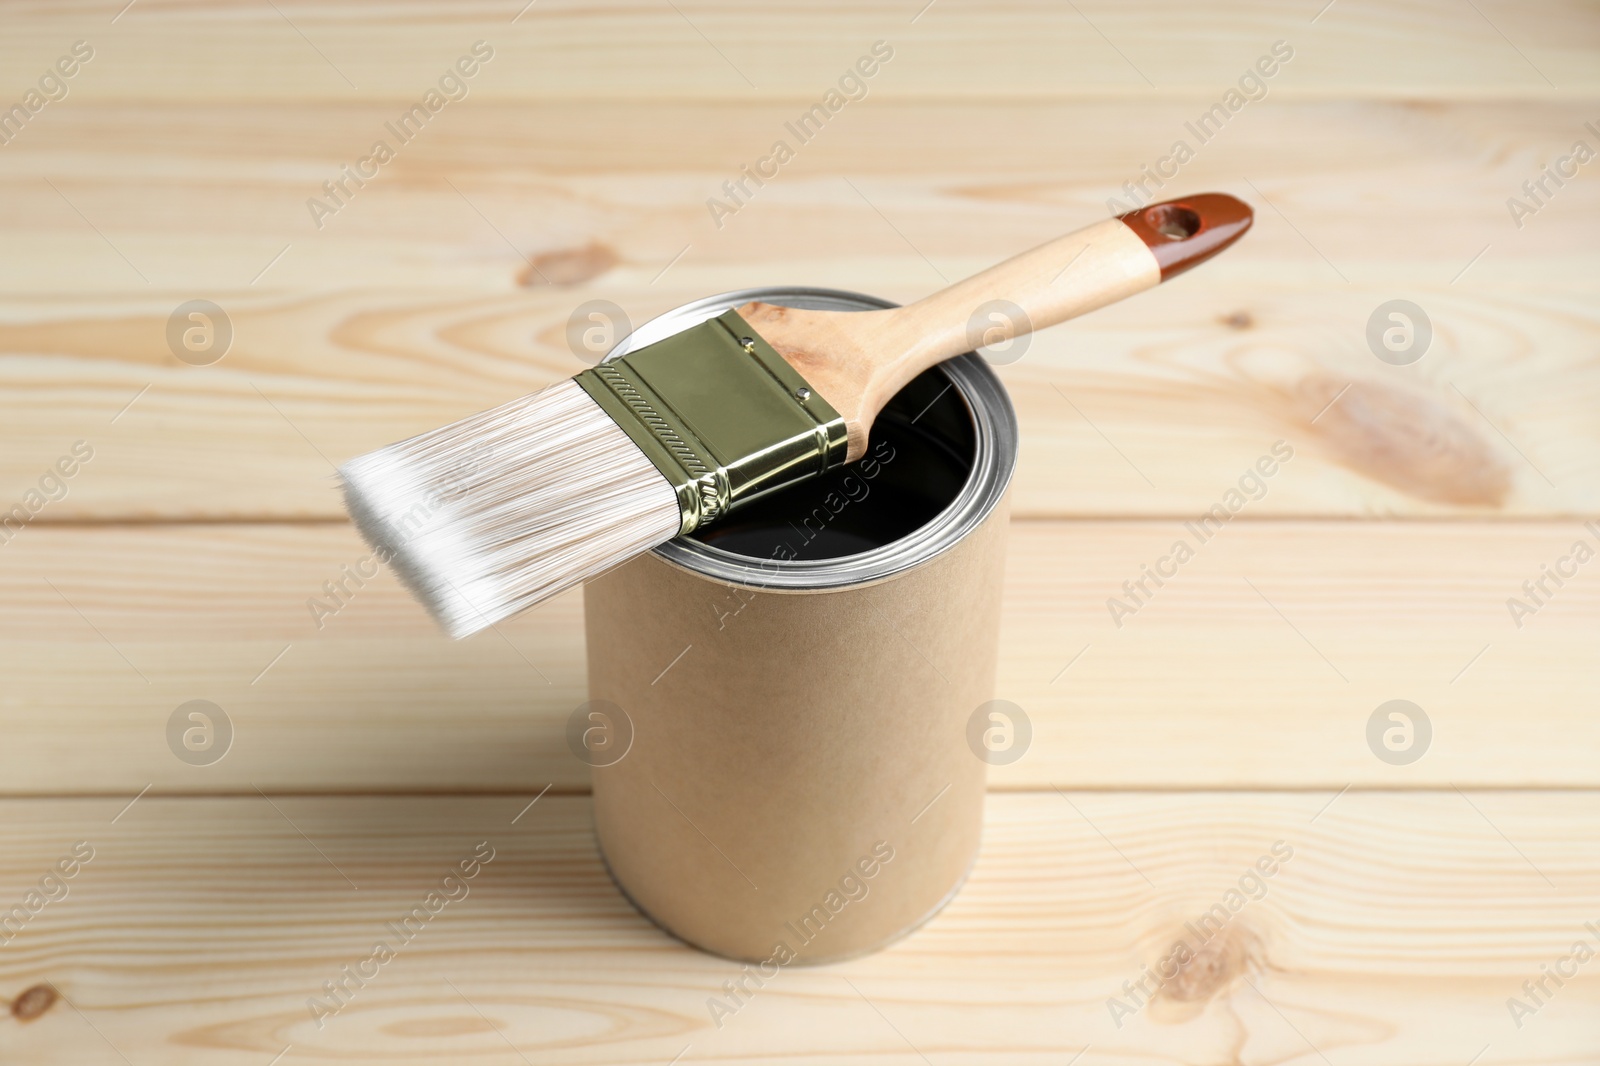 Photo of Can and brush with wood stain on wooden surface